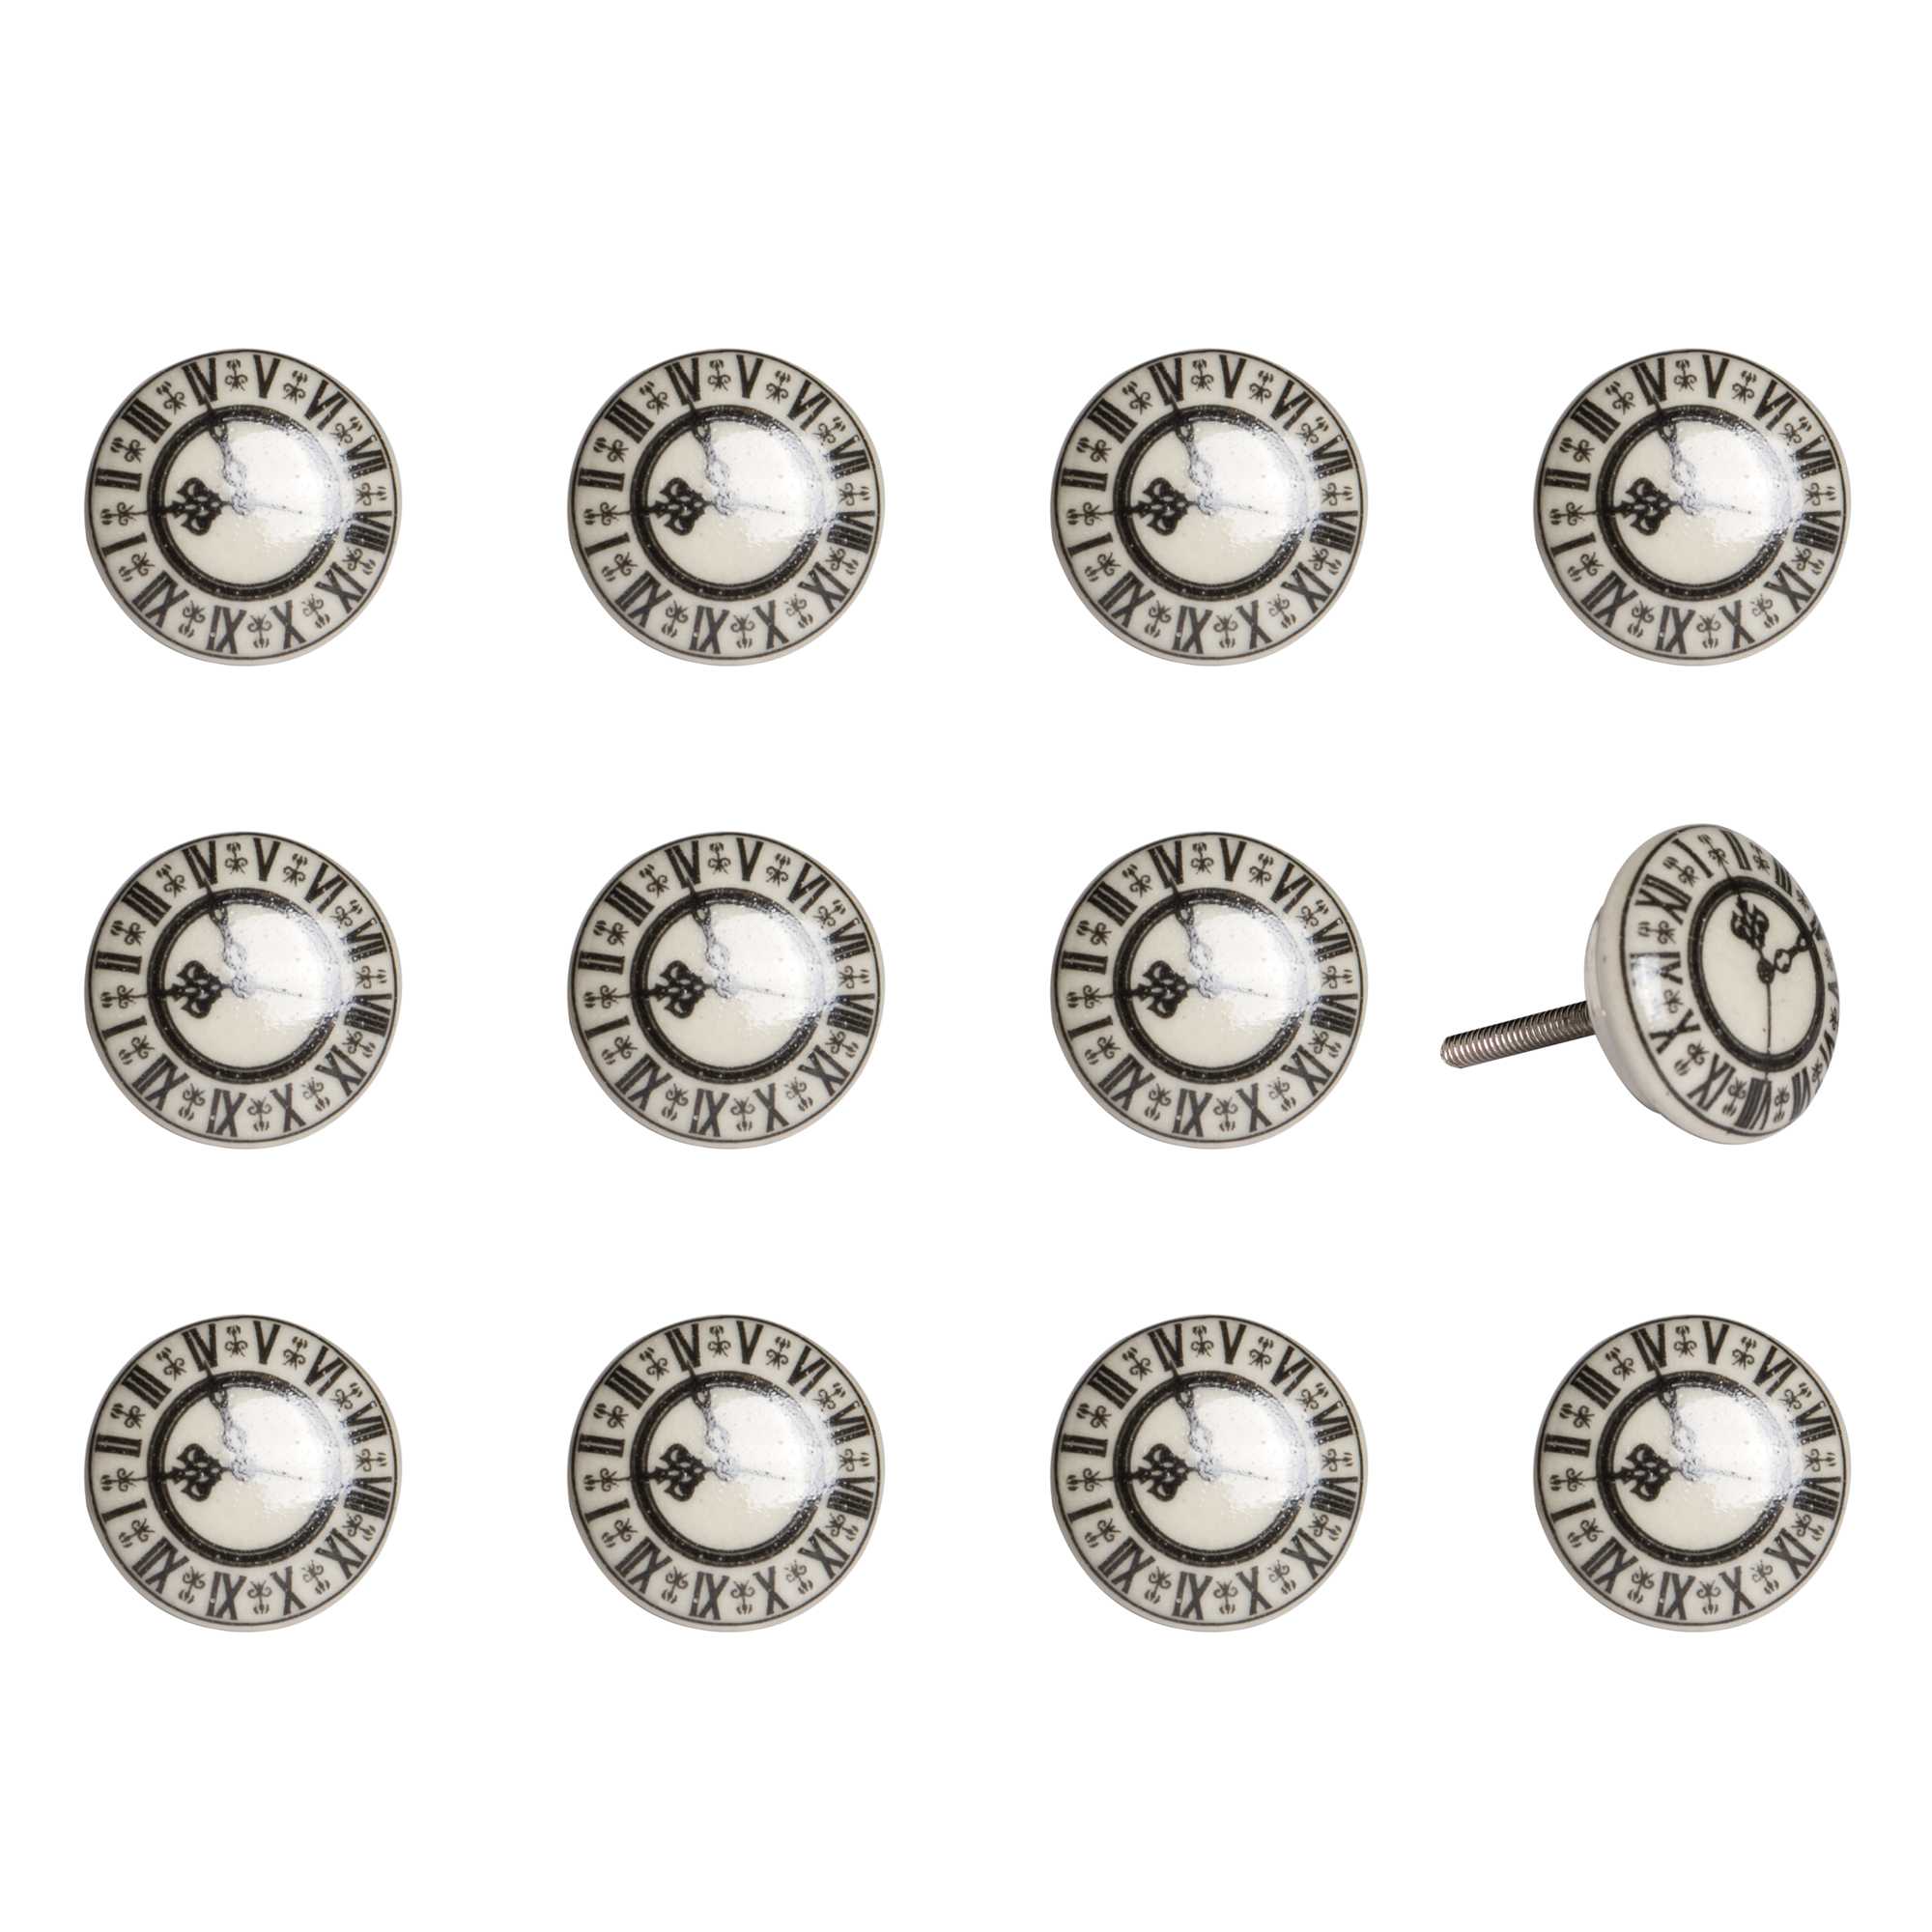 1.5" x 1.5" x 1.5" Cream, Black and Gray - Knobs 12-Pack